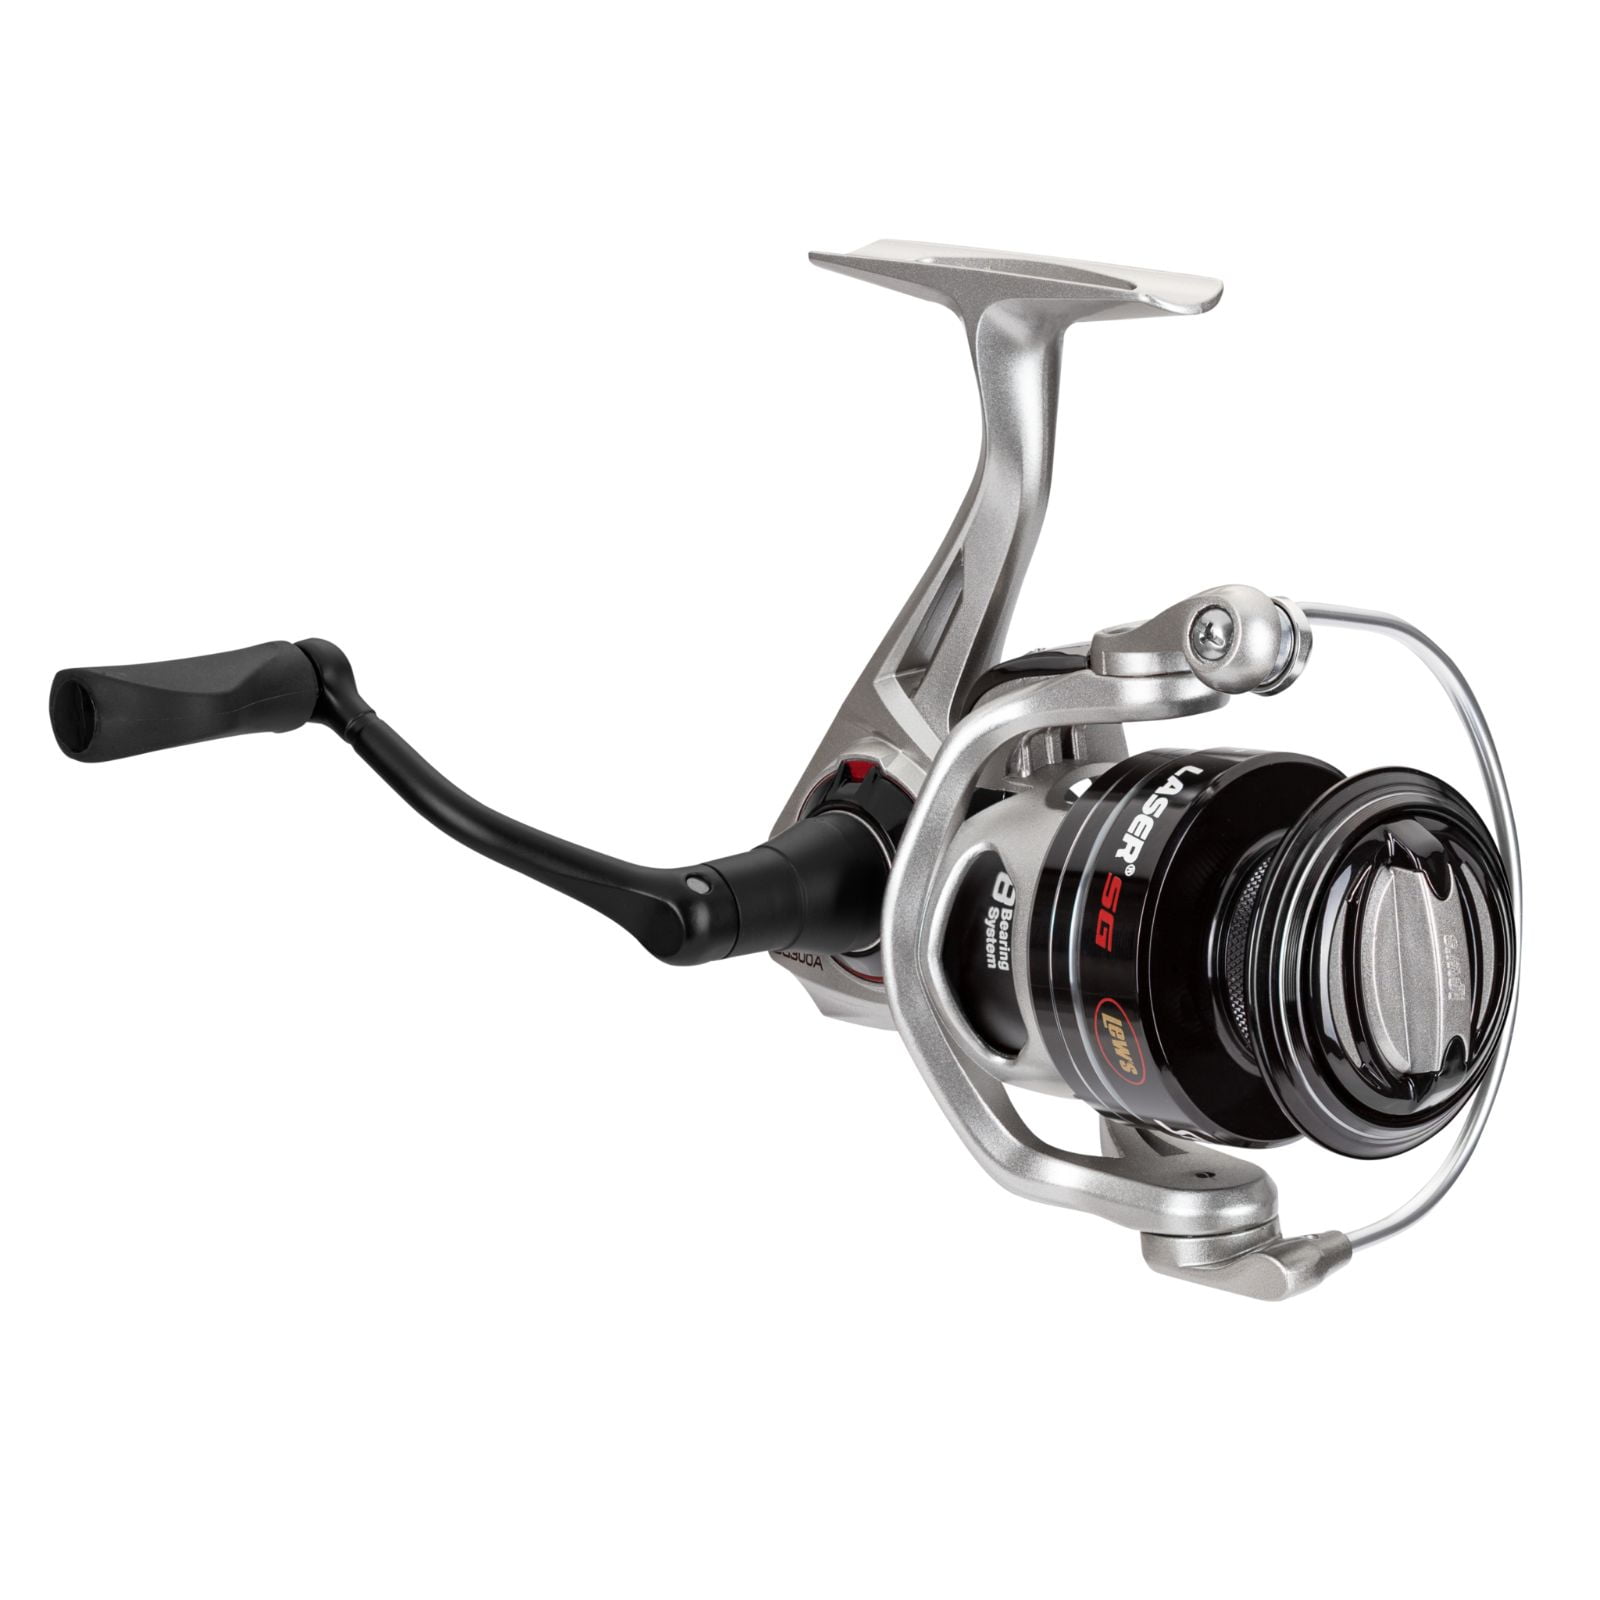 Lew's Laser SG Speed Spin Spinning Fishing Reel, Size 300 Reel, Silver